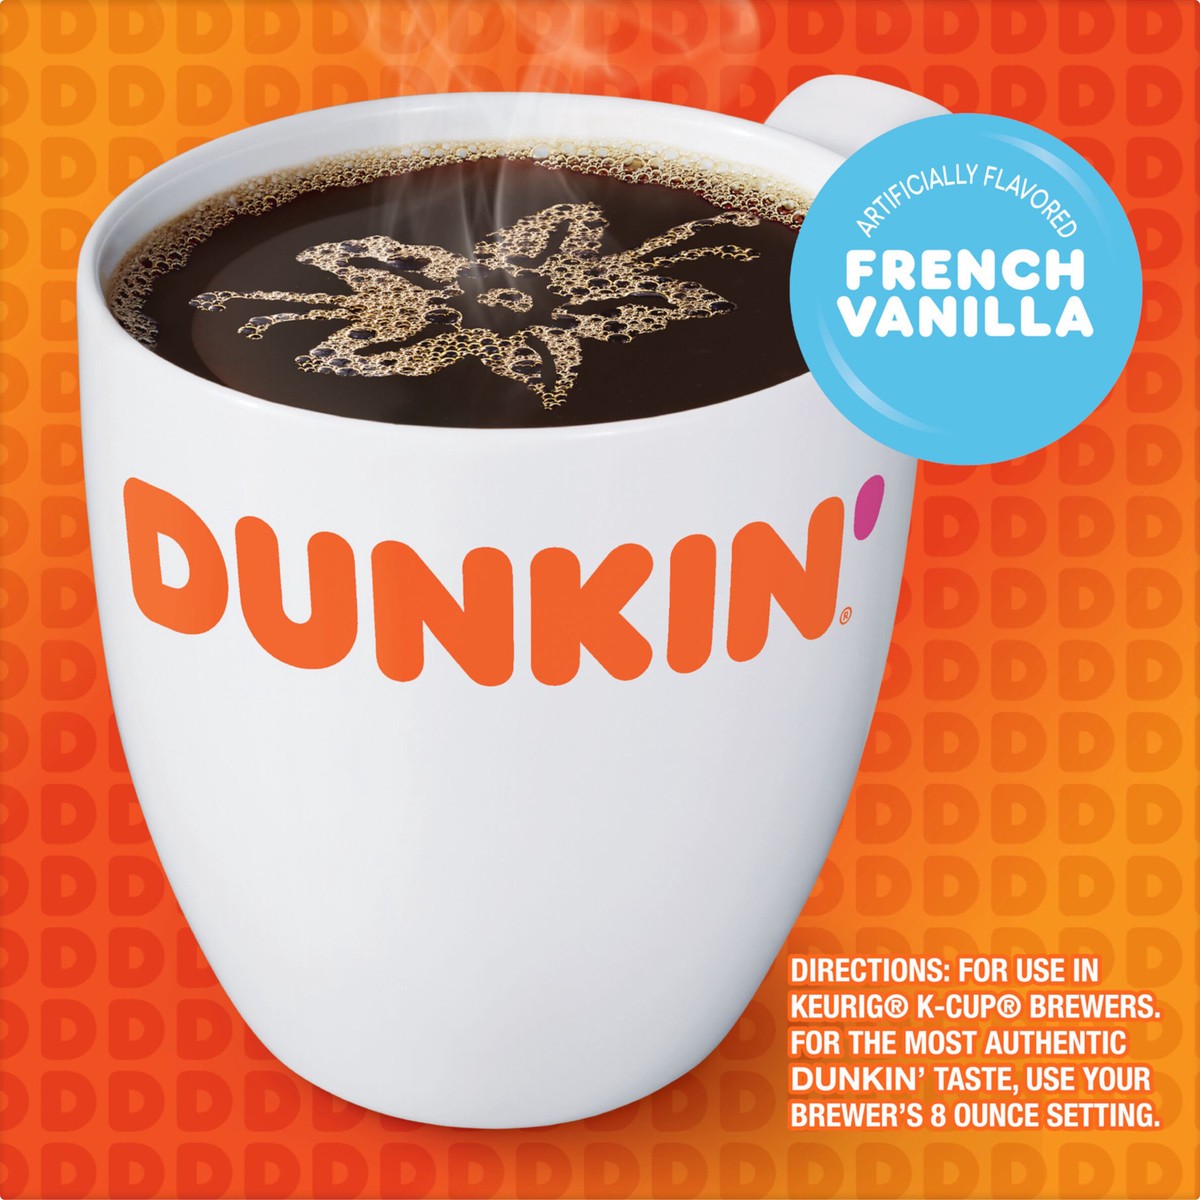 slide 8 of 10, Dunkin'' French Vanilla, Artificially Flavored Coffee, K-Cup Pods, 10 Count Box, 10 ct